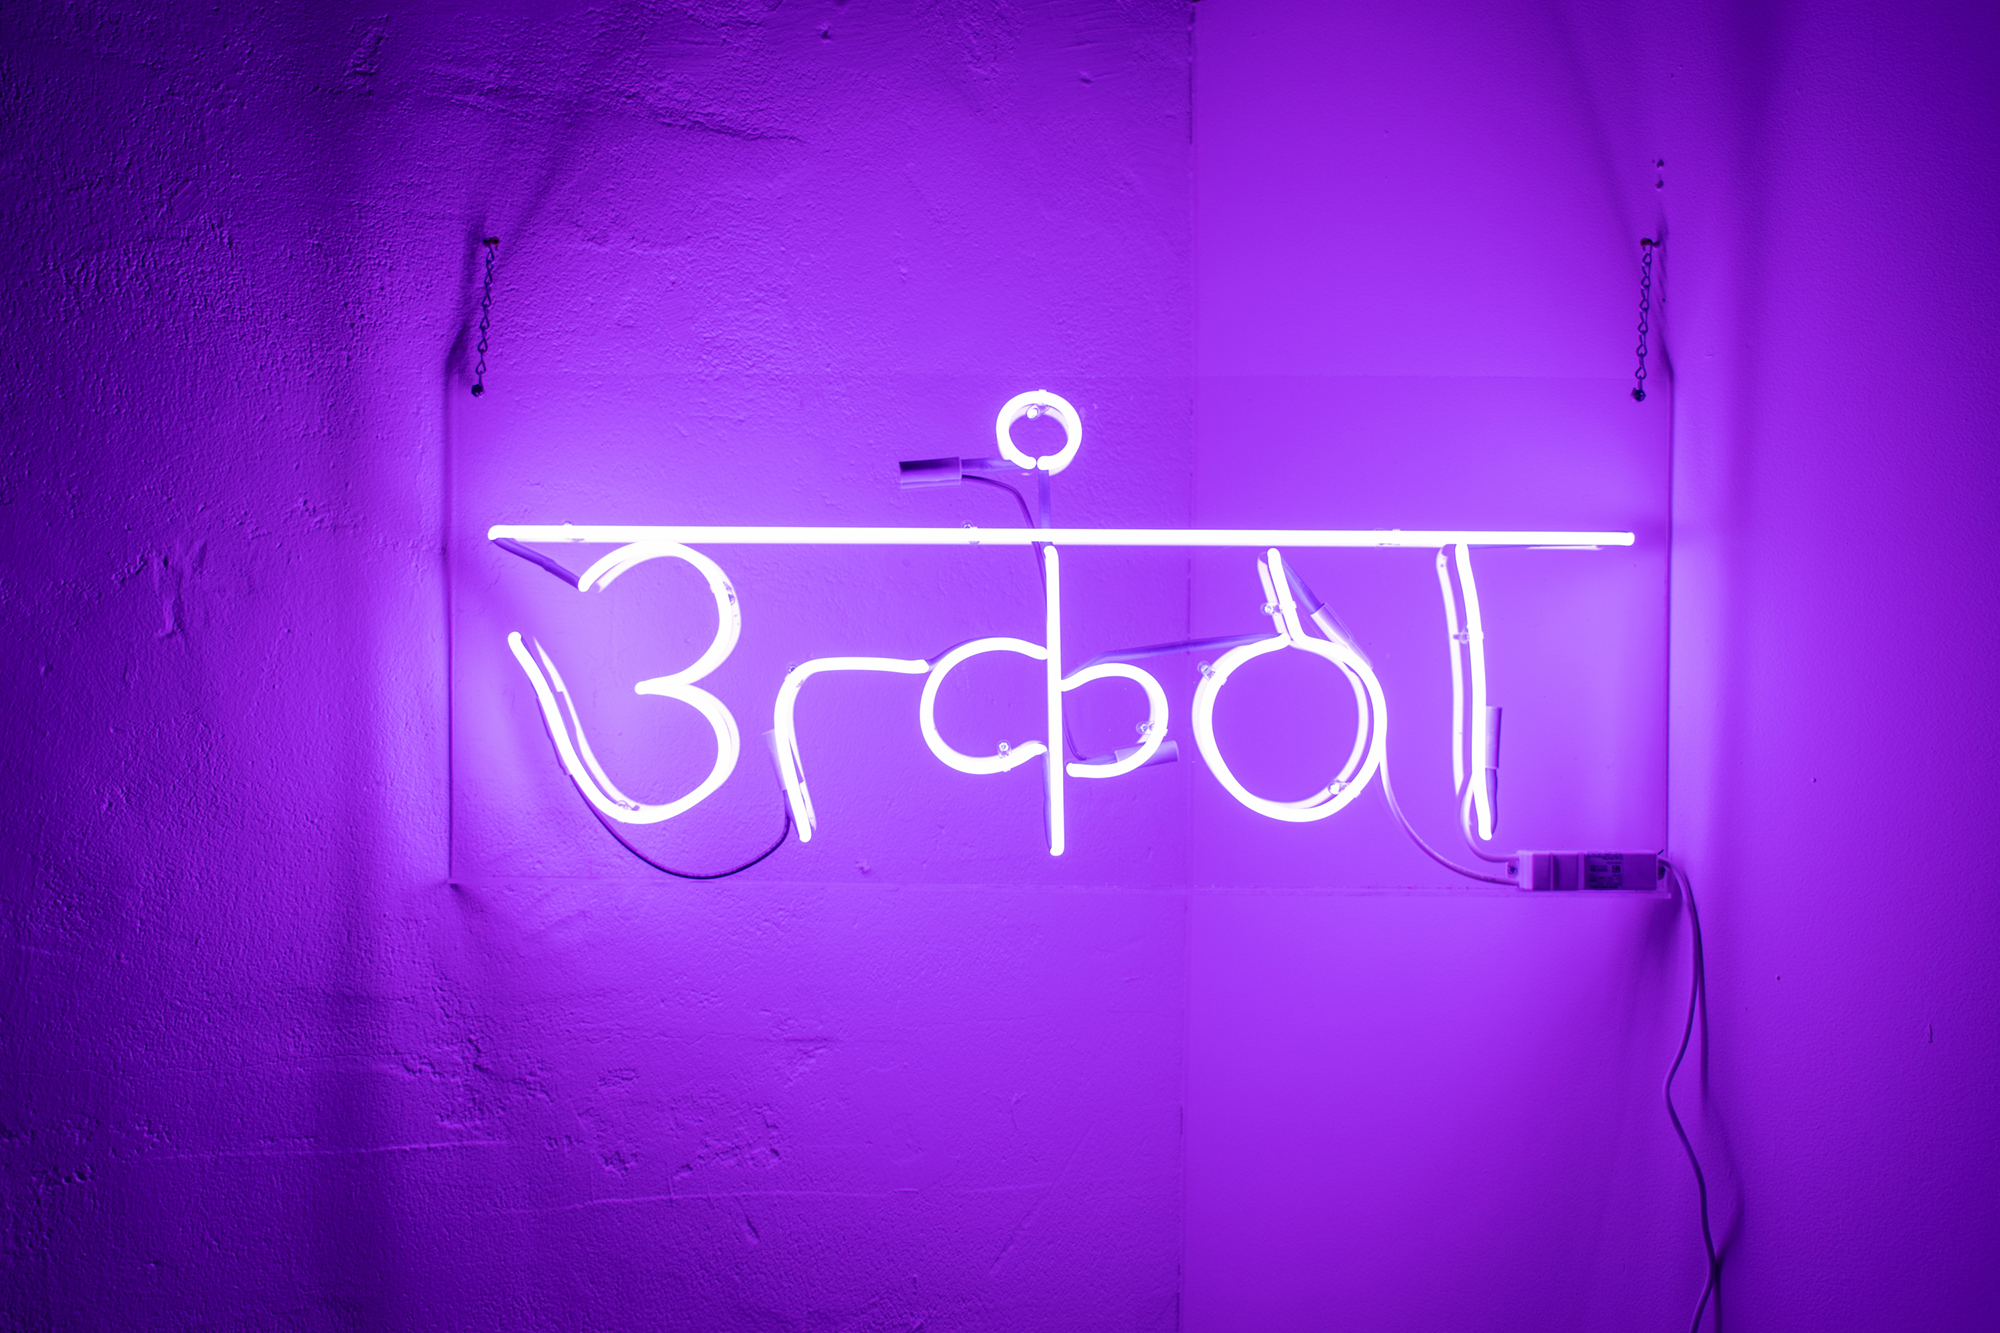 An image of a purple neon sign in Hindi.